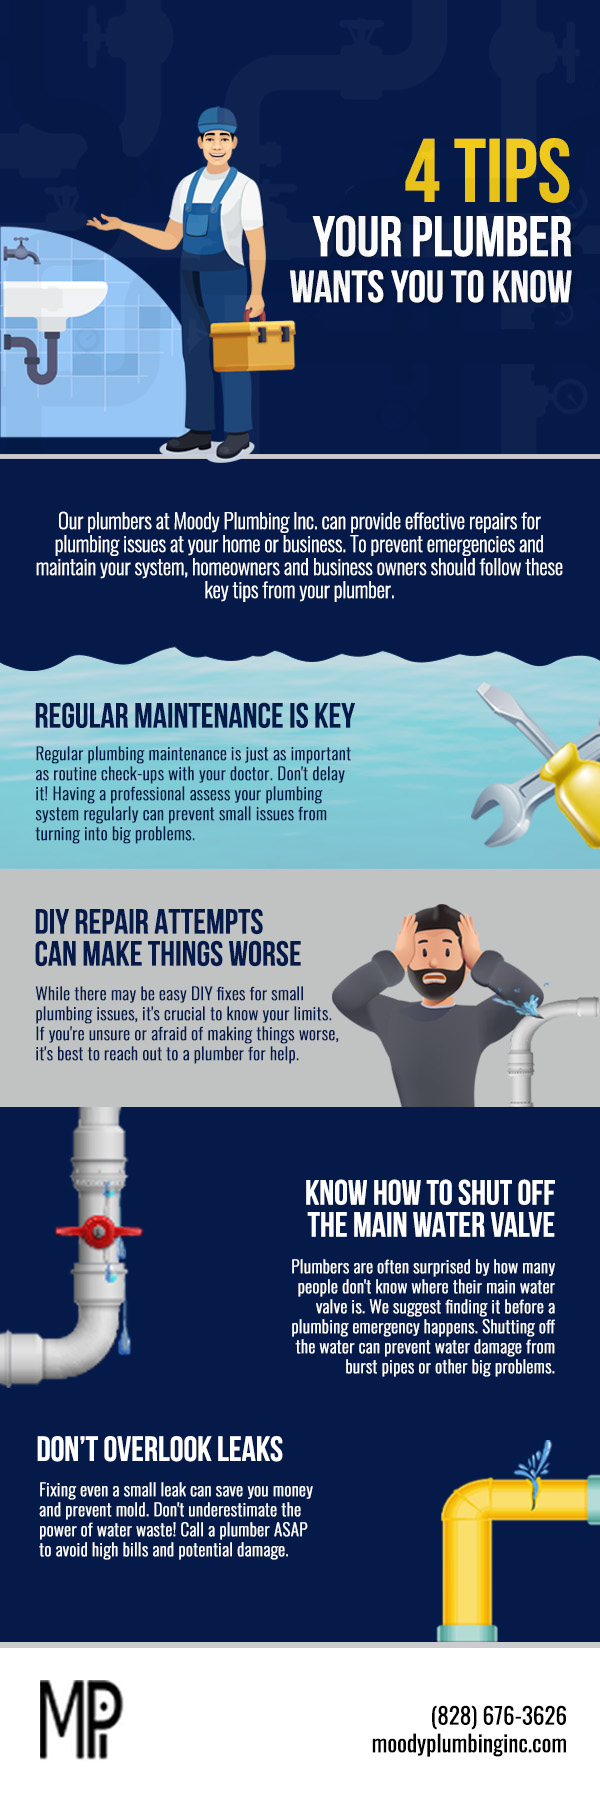 4 Tips Your Plumber Wants You to Know